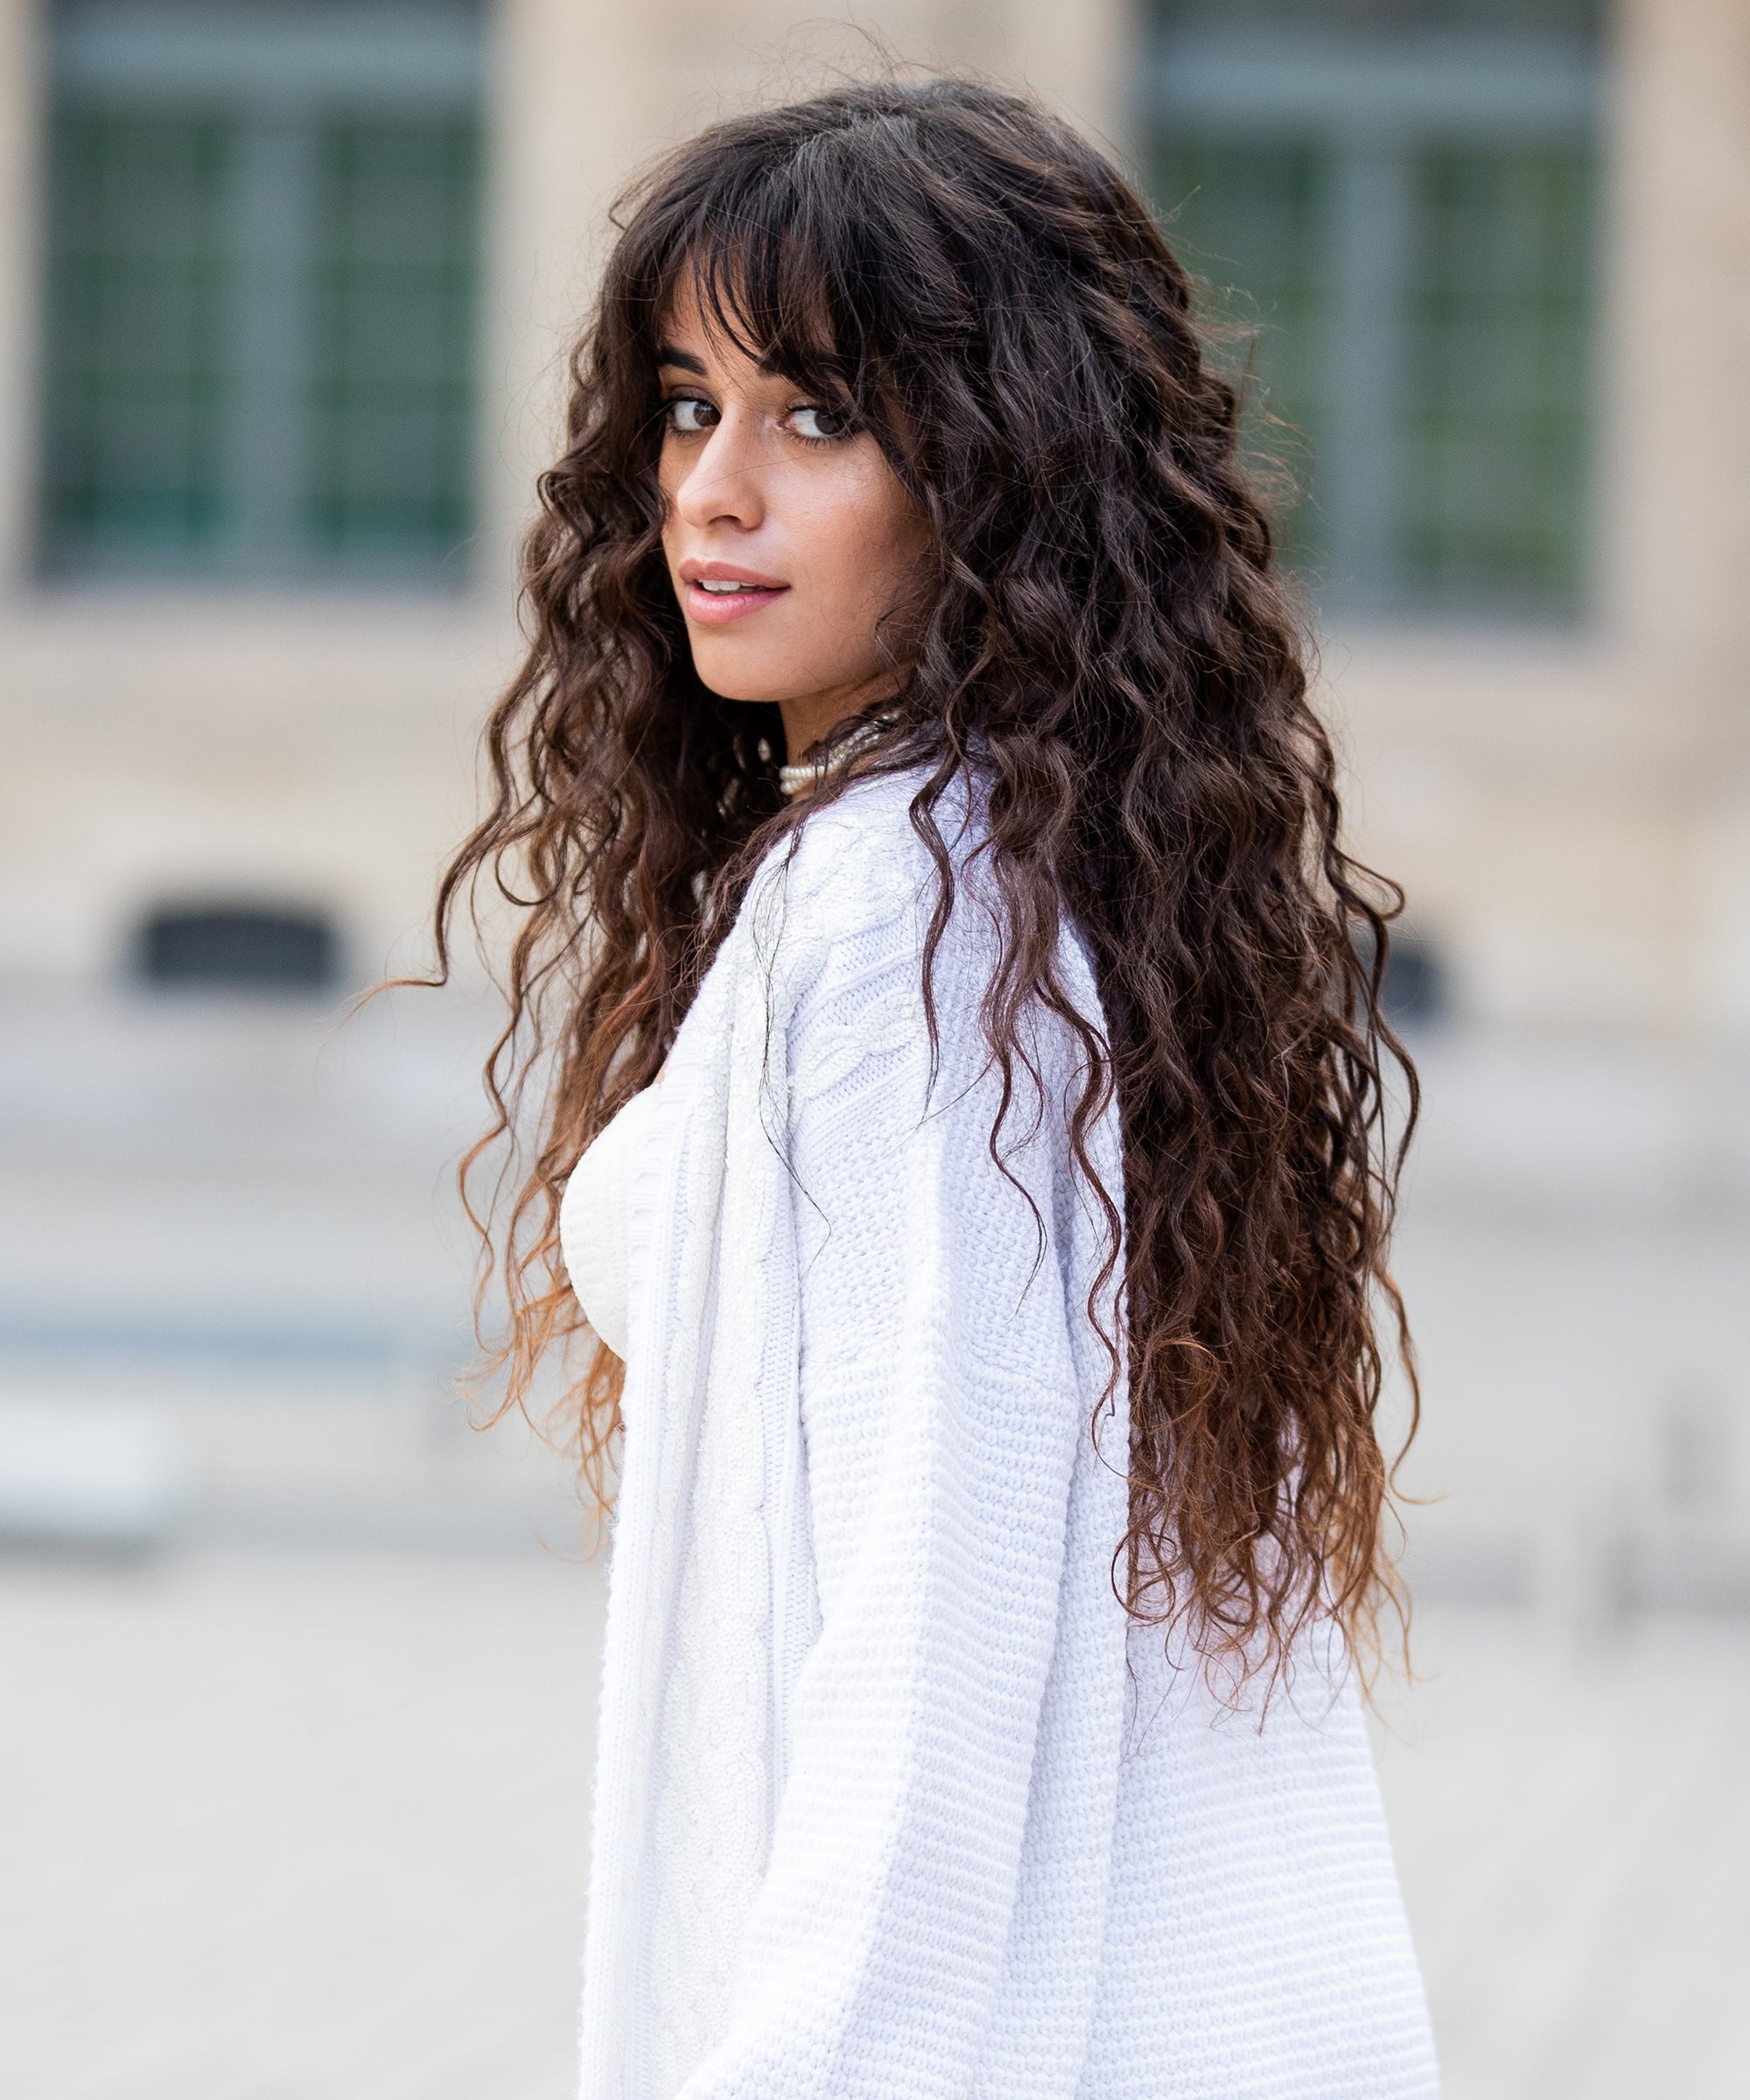 Camila Cabellos New Curly Shag Is the Next Breakout Hair Trend